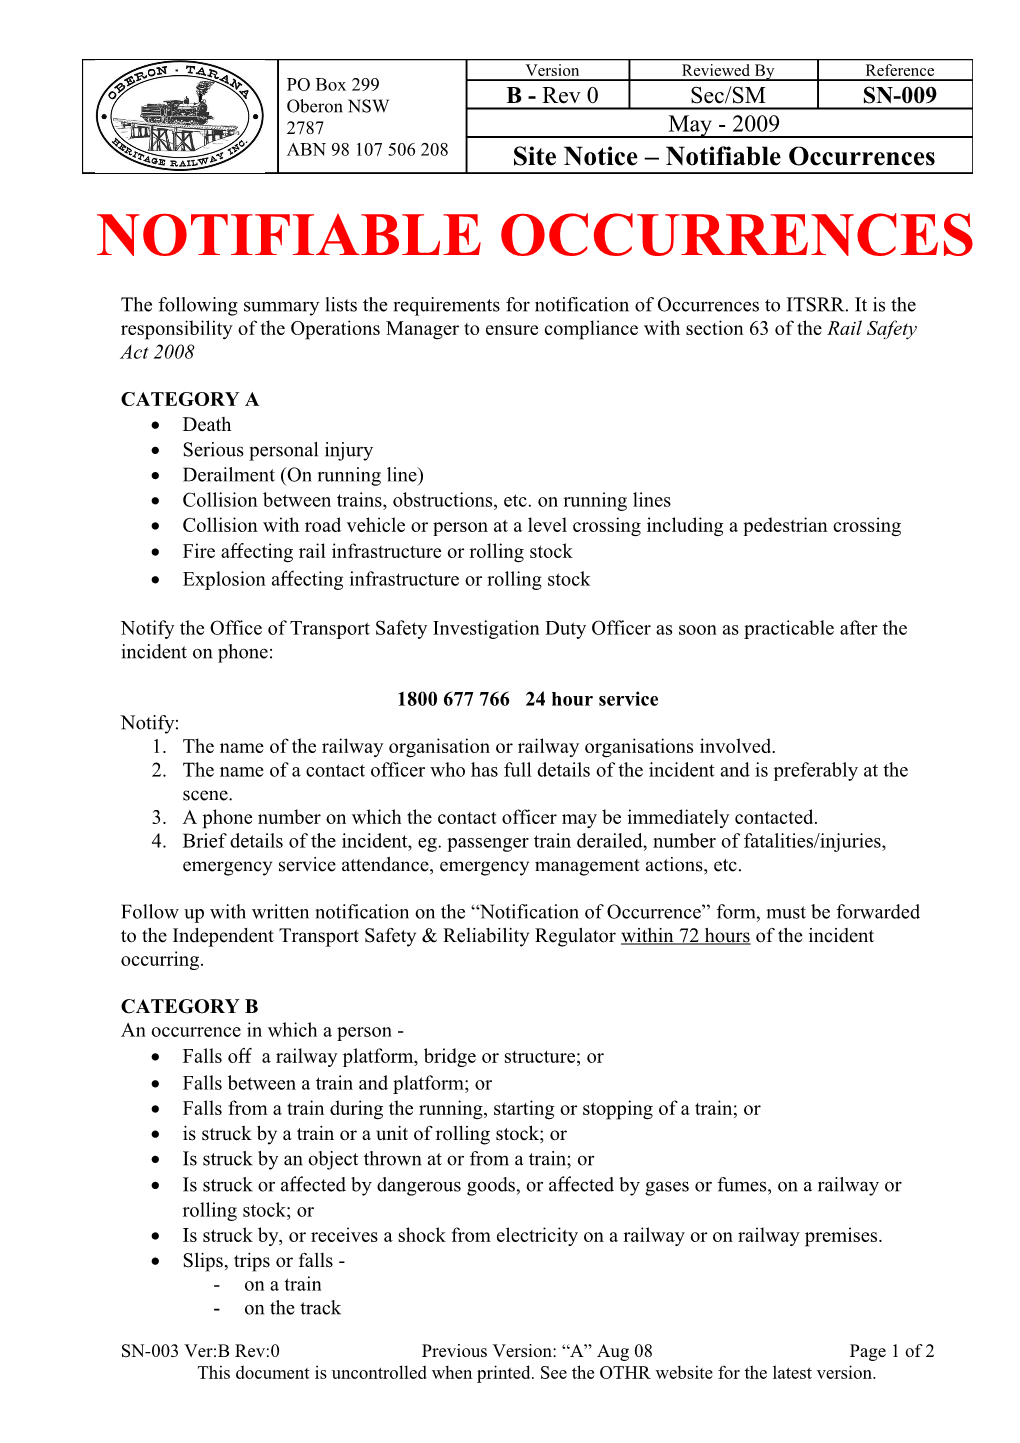 Notifiable Occurrences